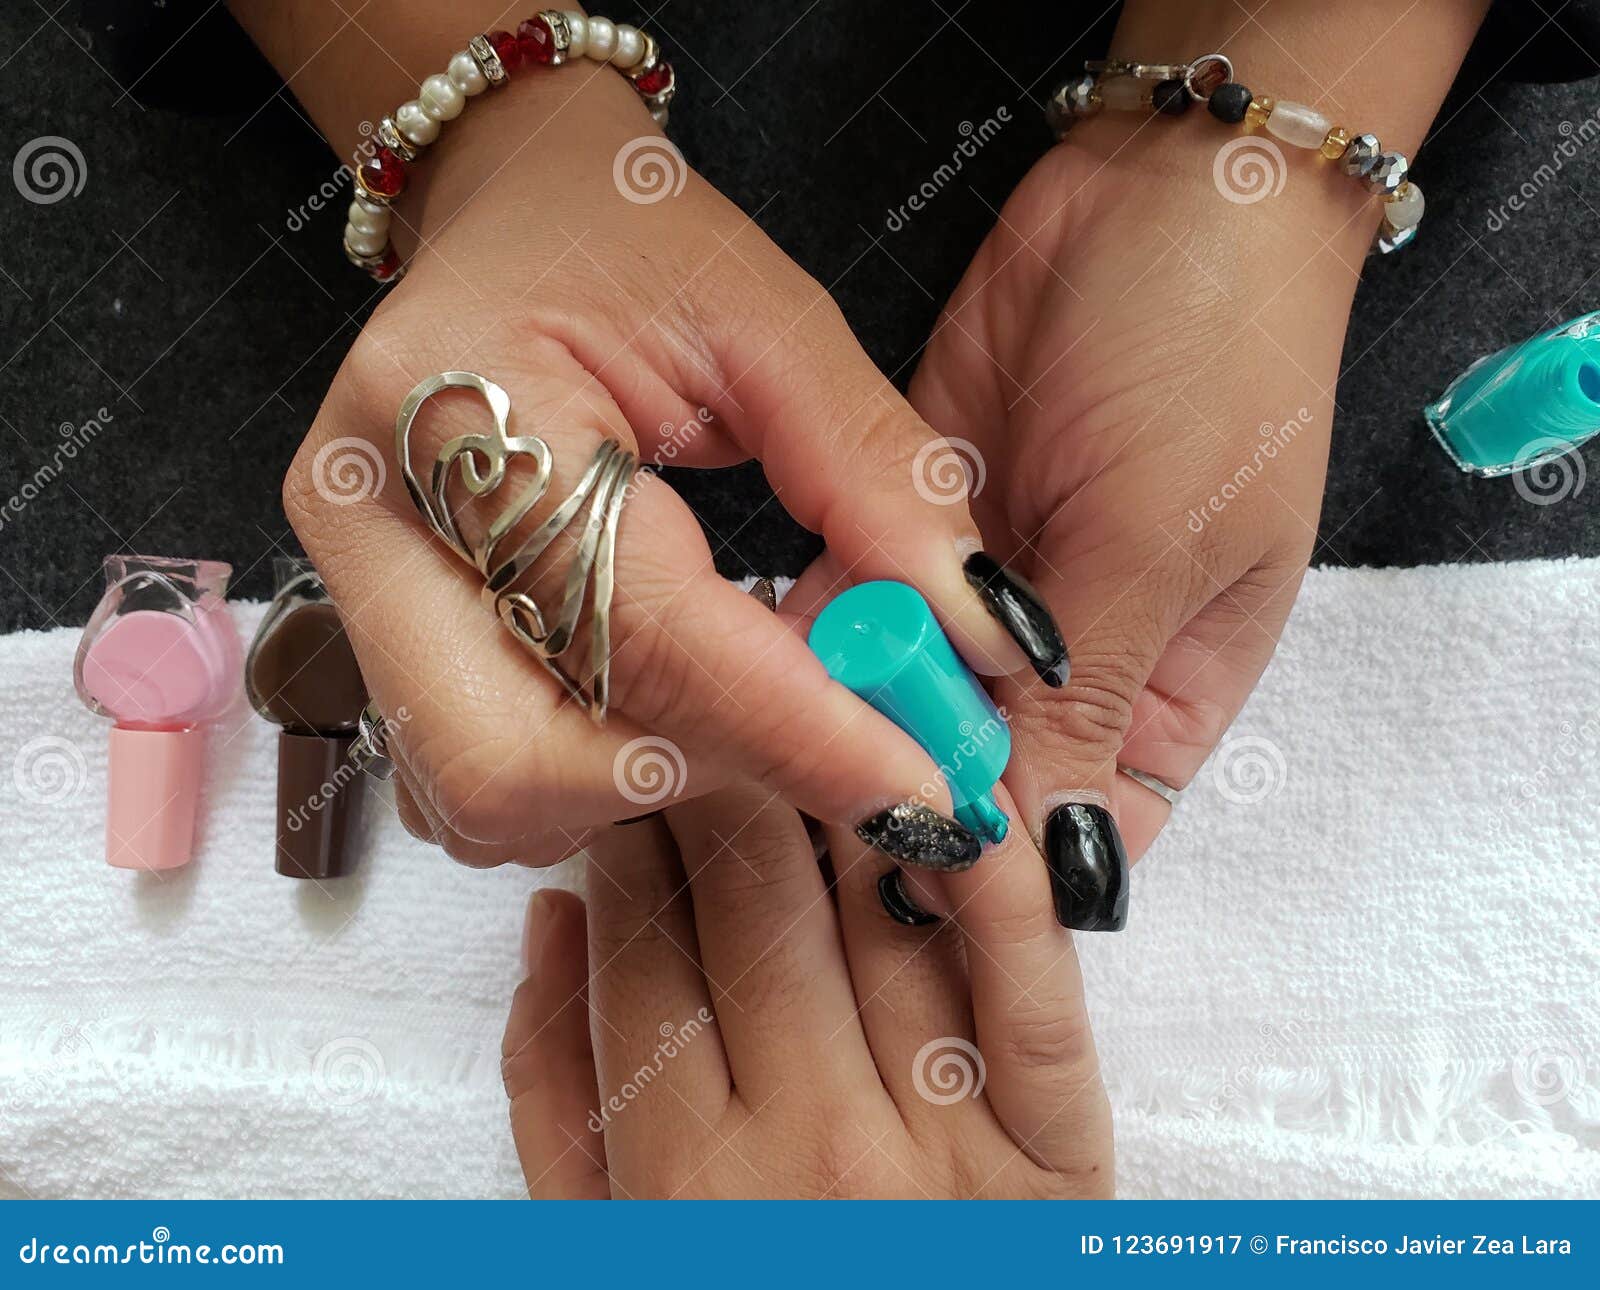 woman painting the fingernails of another woman with aquamarine nail polish